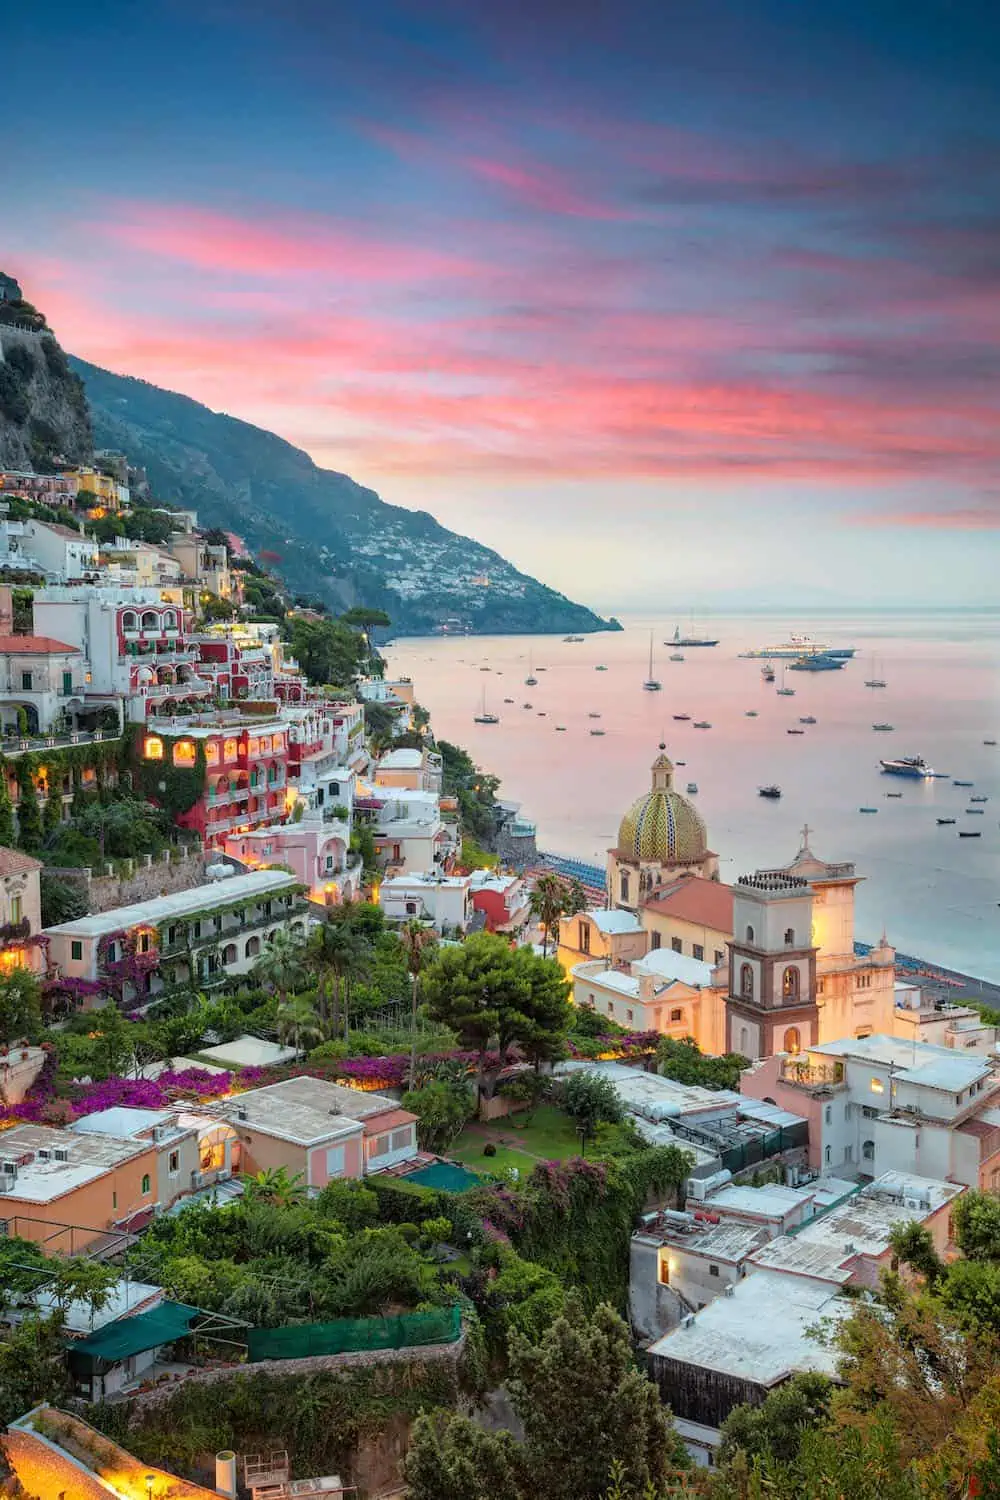 Evening view of Positano restaurants, town and sea. 